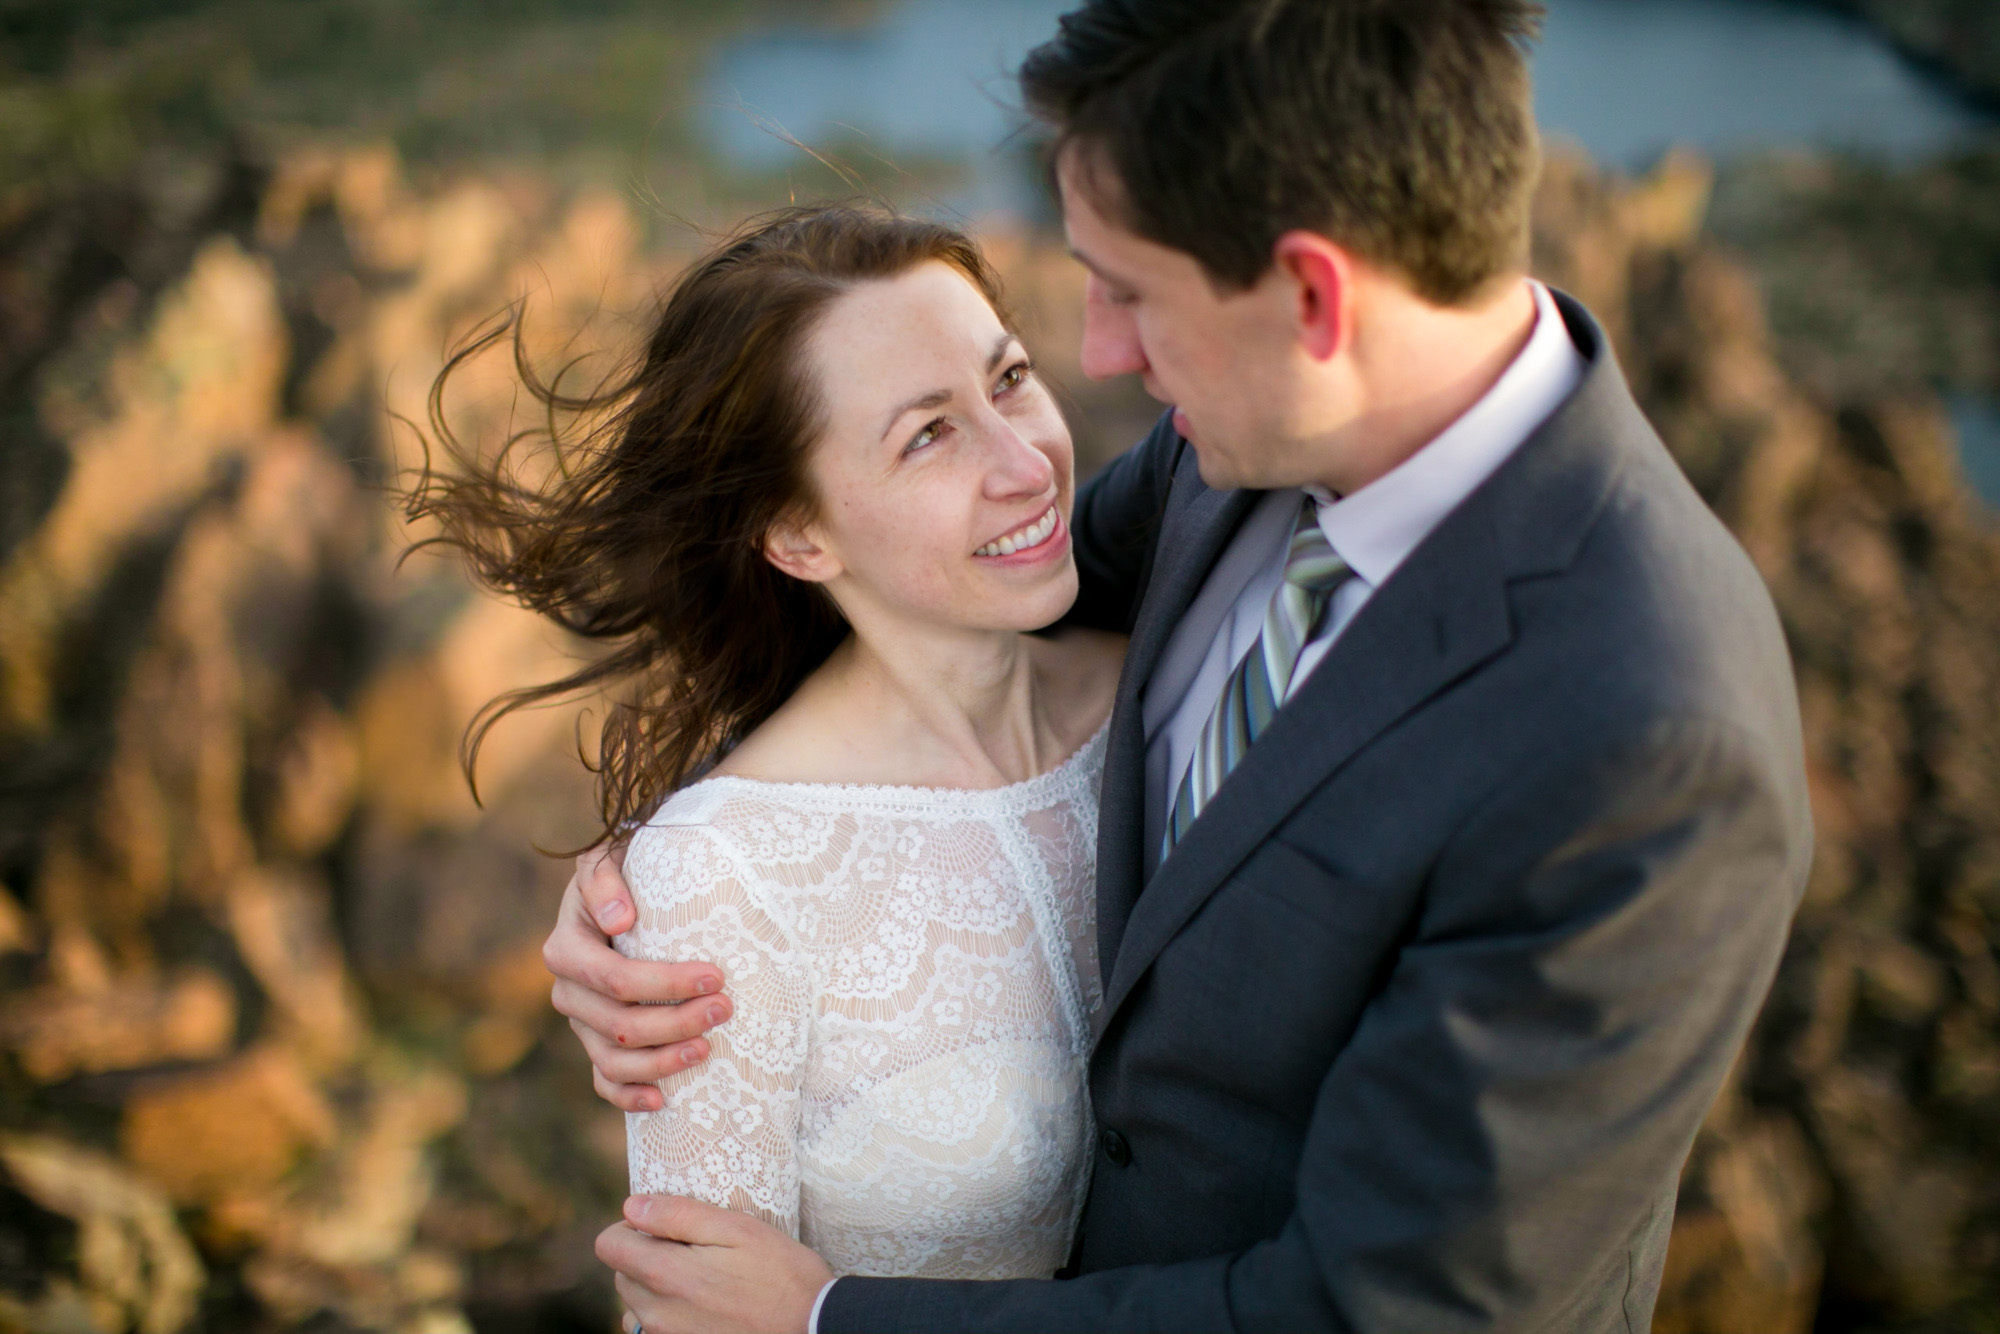 A close-up of bride who smiles up at a groom embracing her as they stand on a cliff.